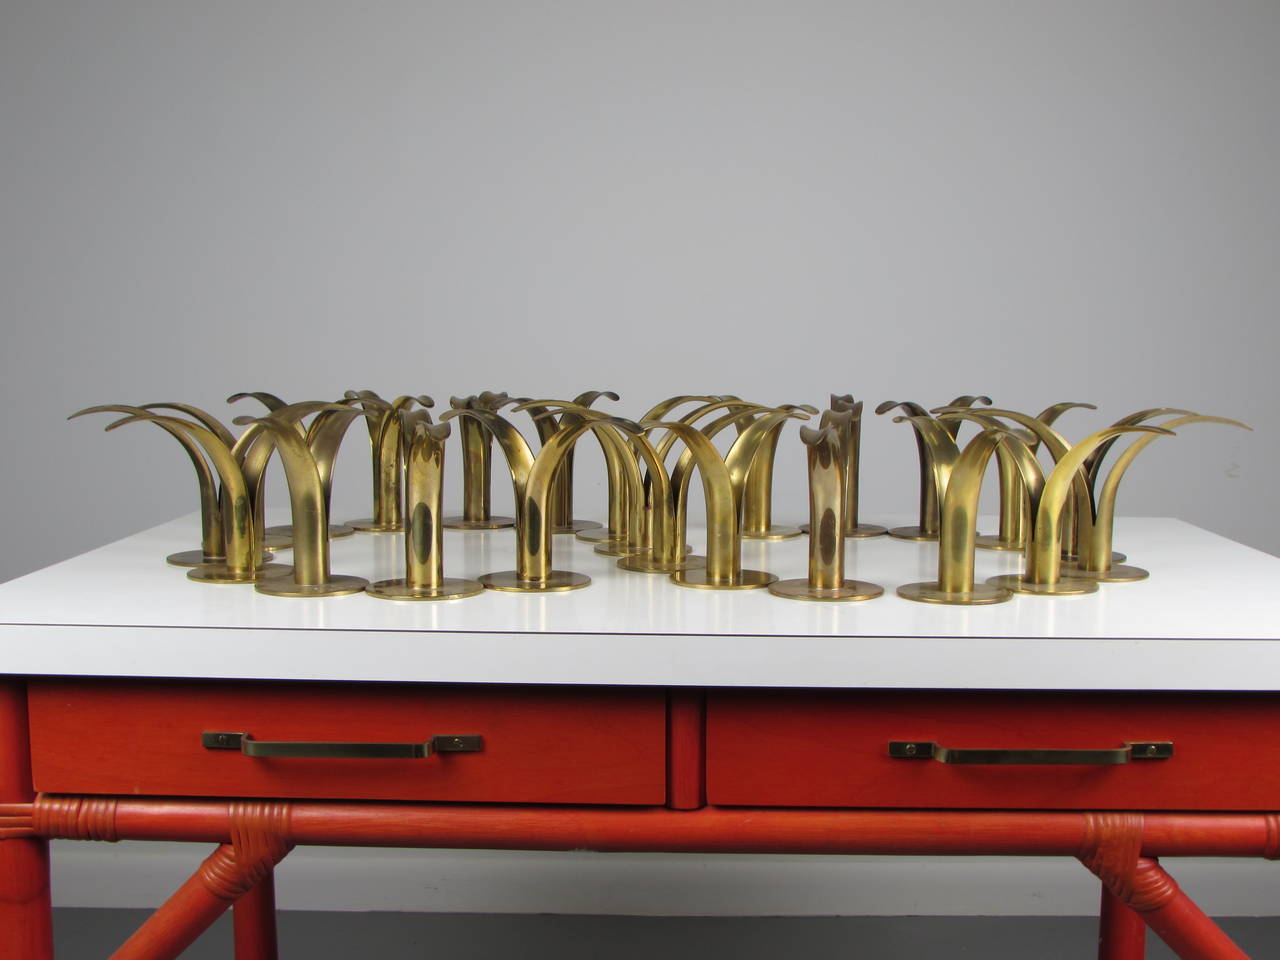 Awesome collection of brass lily candleholders by designed by Ivar Ålenius Björk for Ystad Metal in 1939. Produced through the 1950s. Collection of 23 pieces in various condition. Some have a slight size variation.